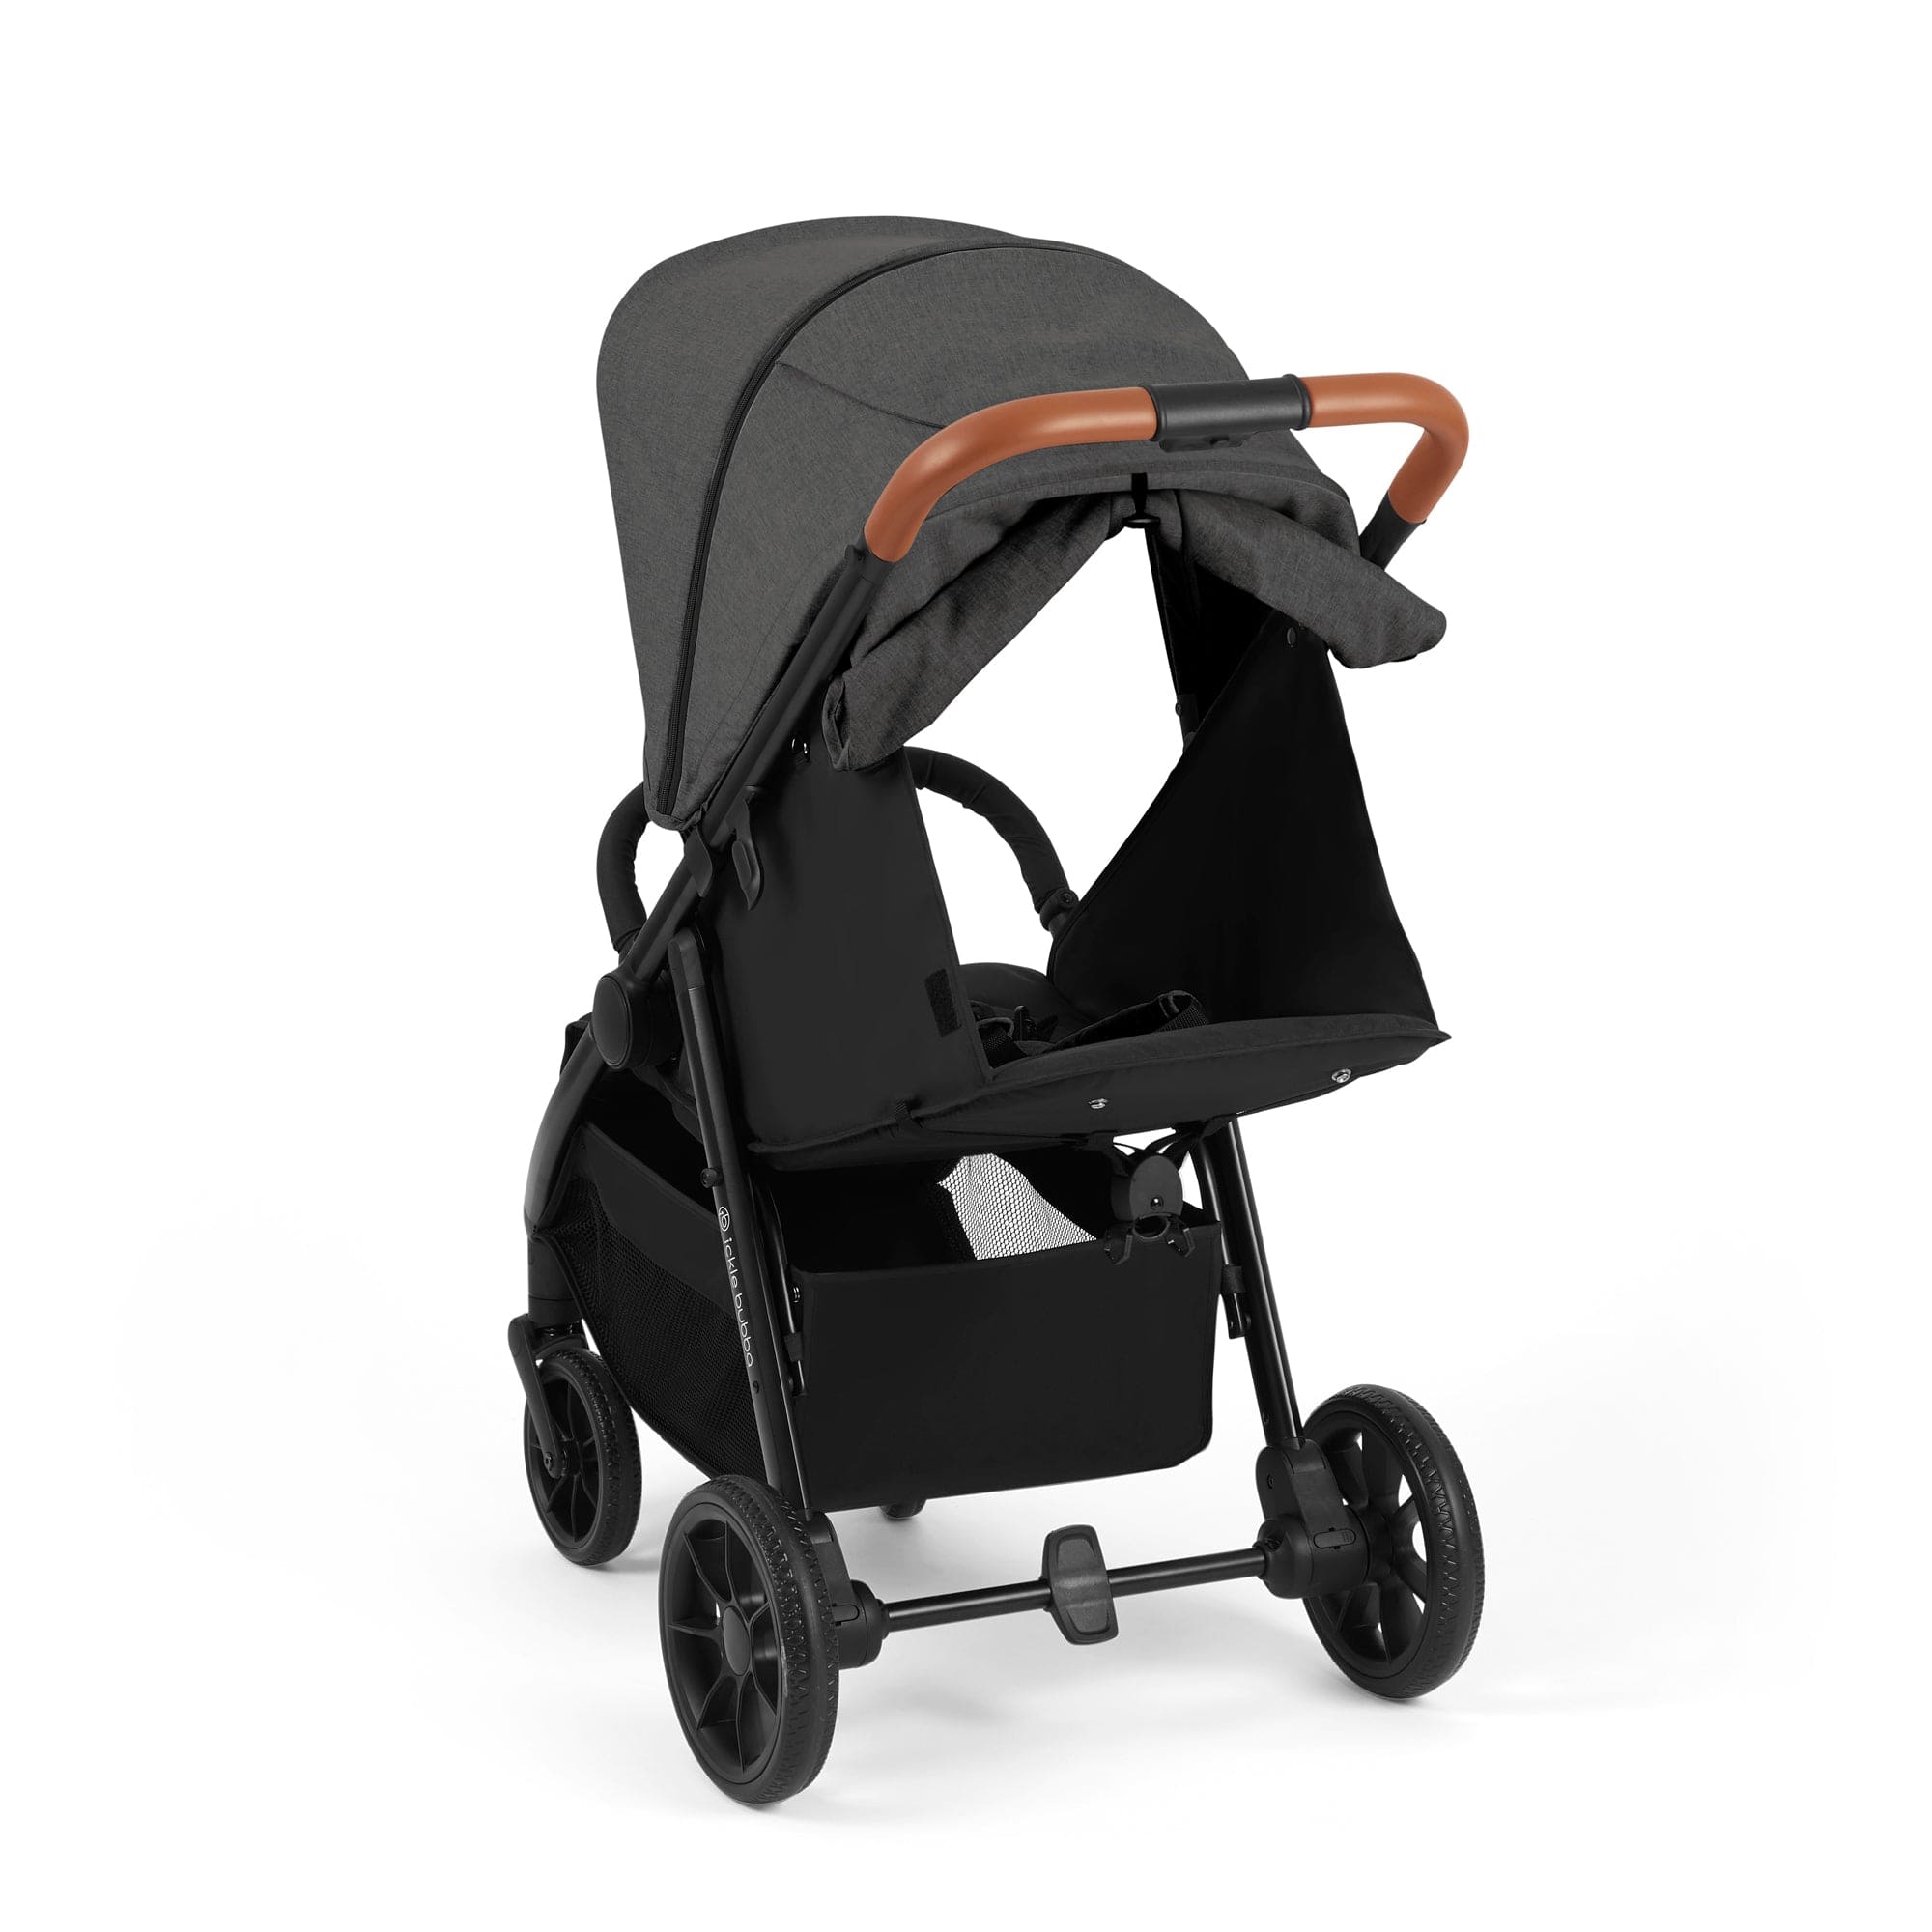 STOMP STRIDE MAX STROLLER in Charcoal Grey Pushchairs & Buggies 15-006-200-148 5056515033878